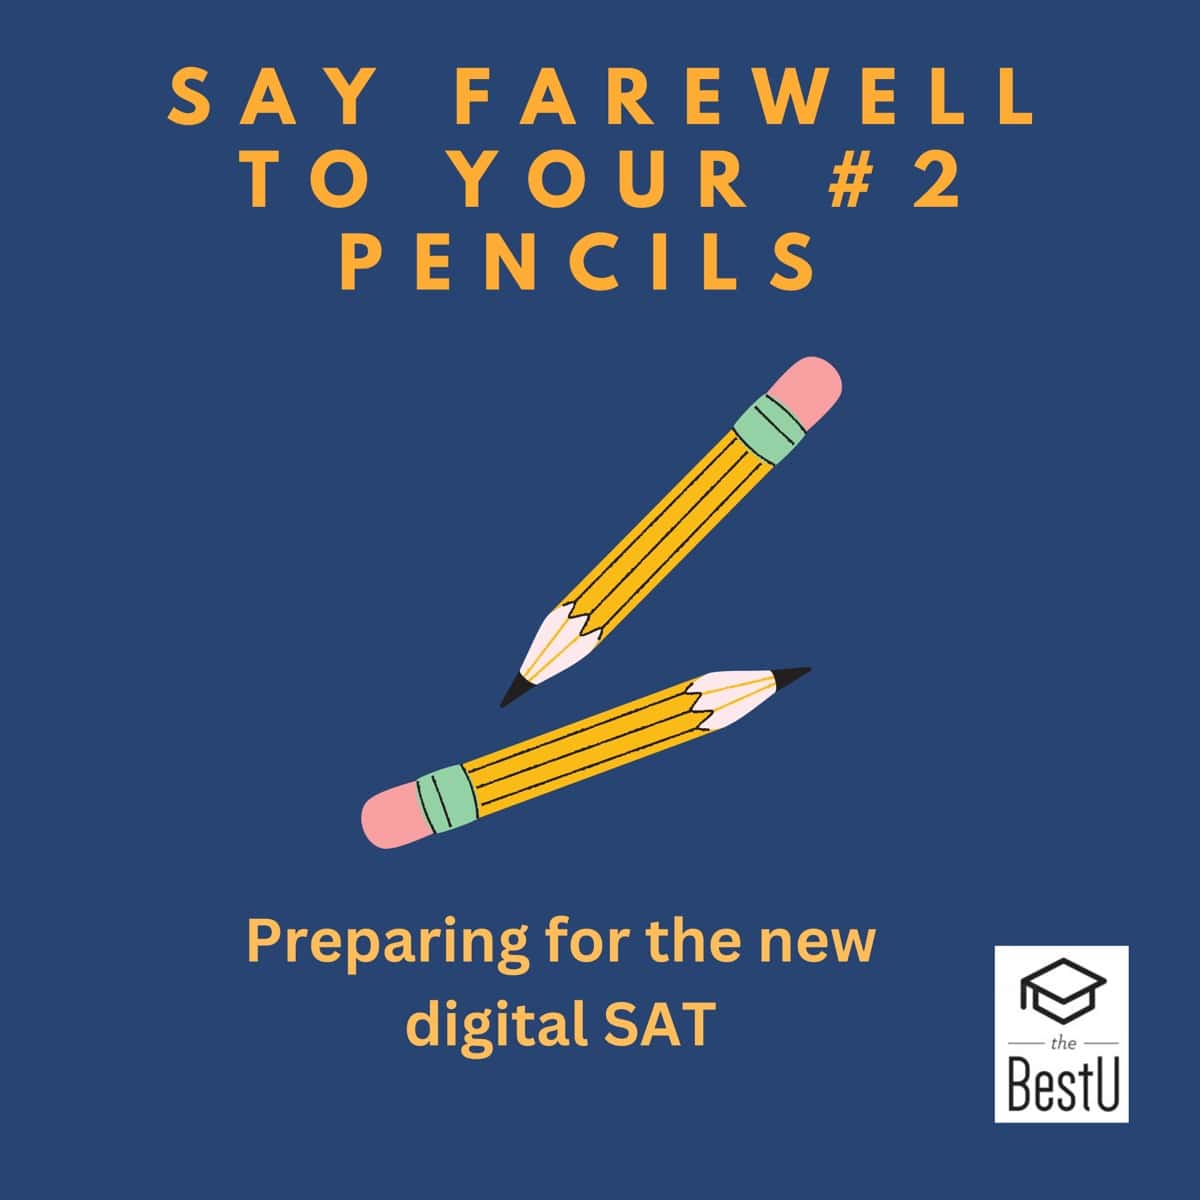 What’s Next in Testing: Preparing for the new digital SAT